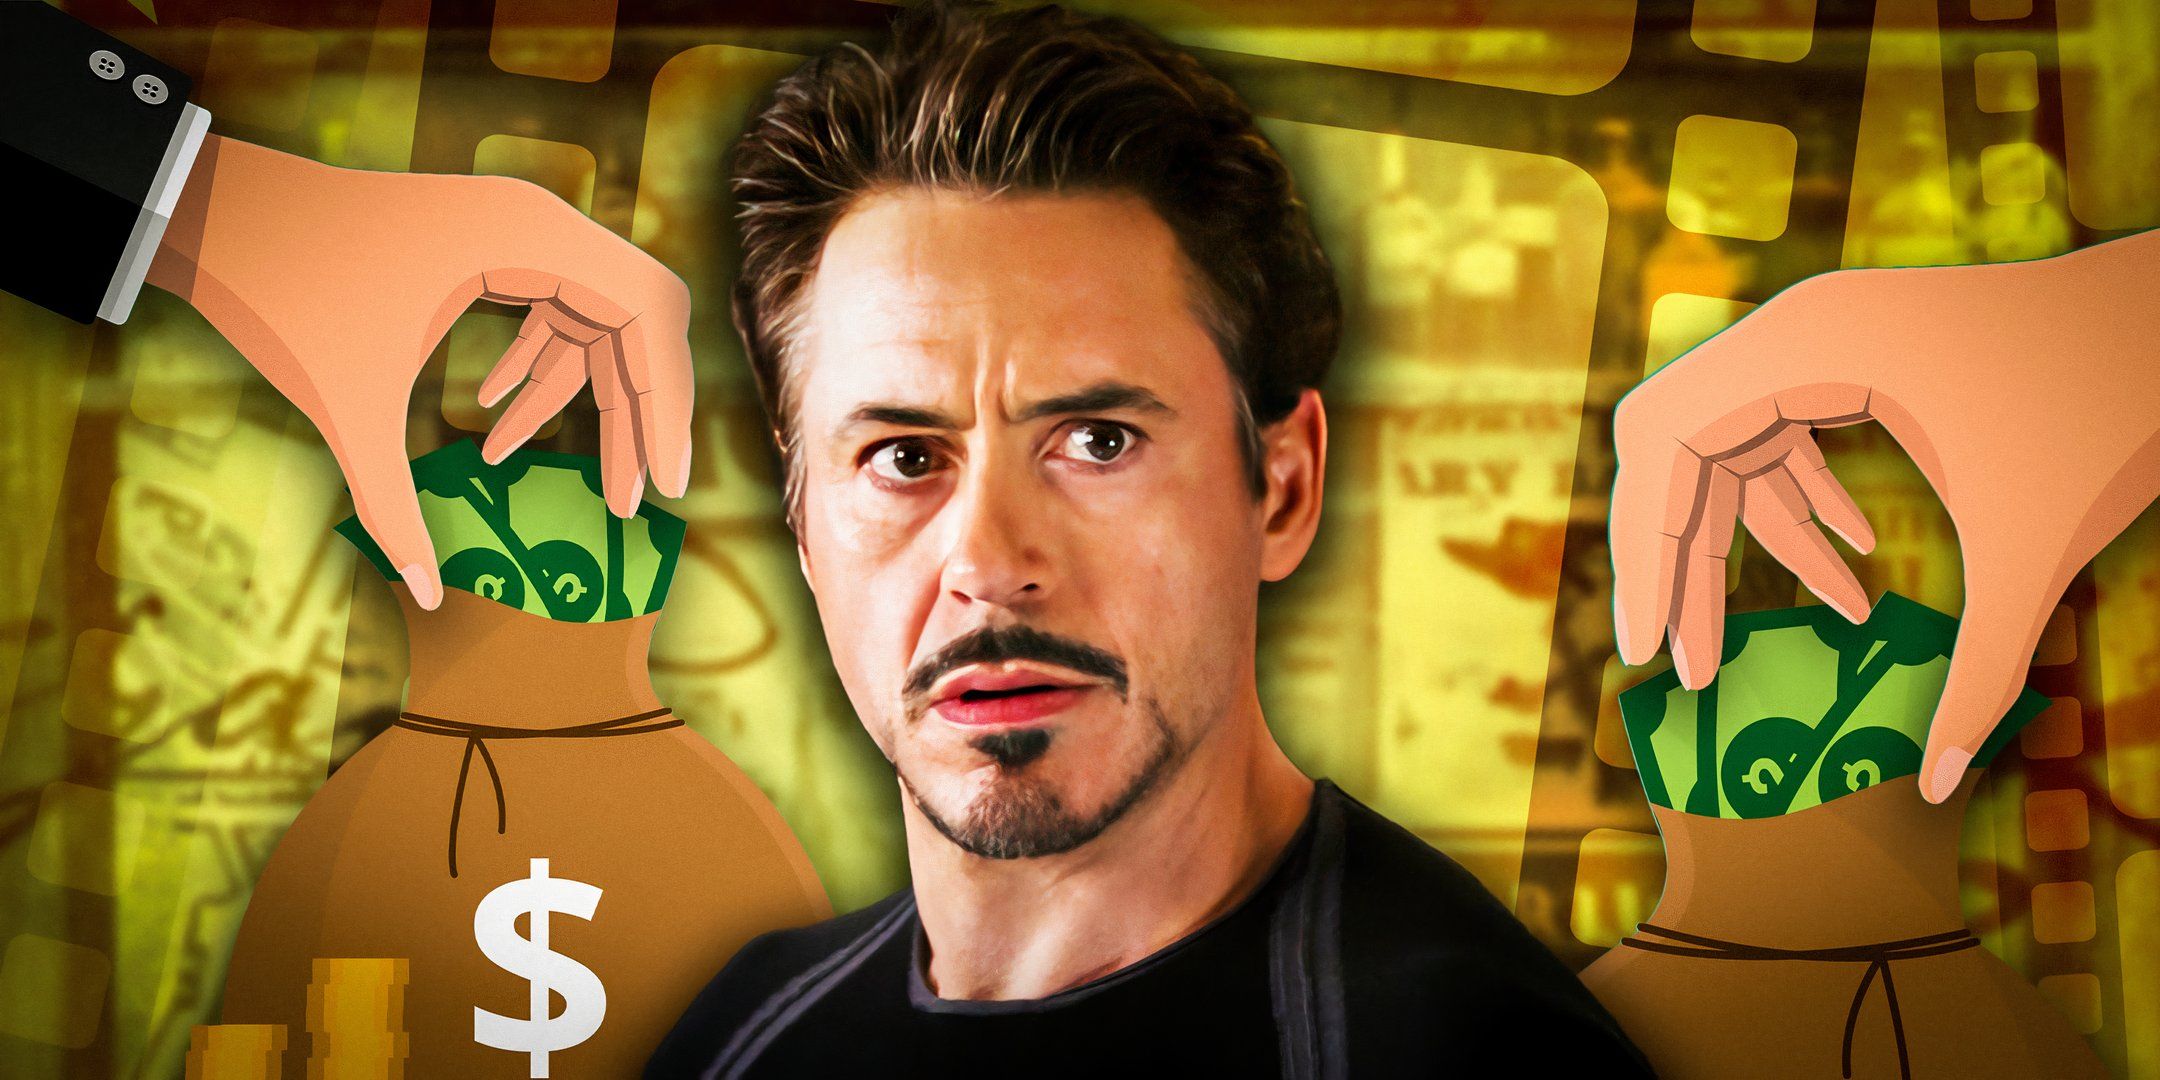 Robert Downey Jr. as Iron Man in The Avengers with money